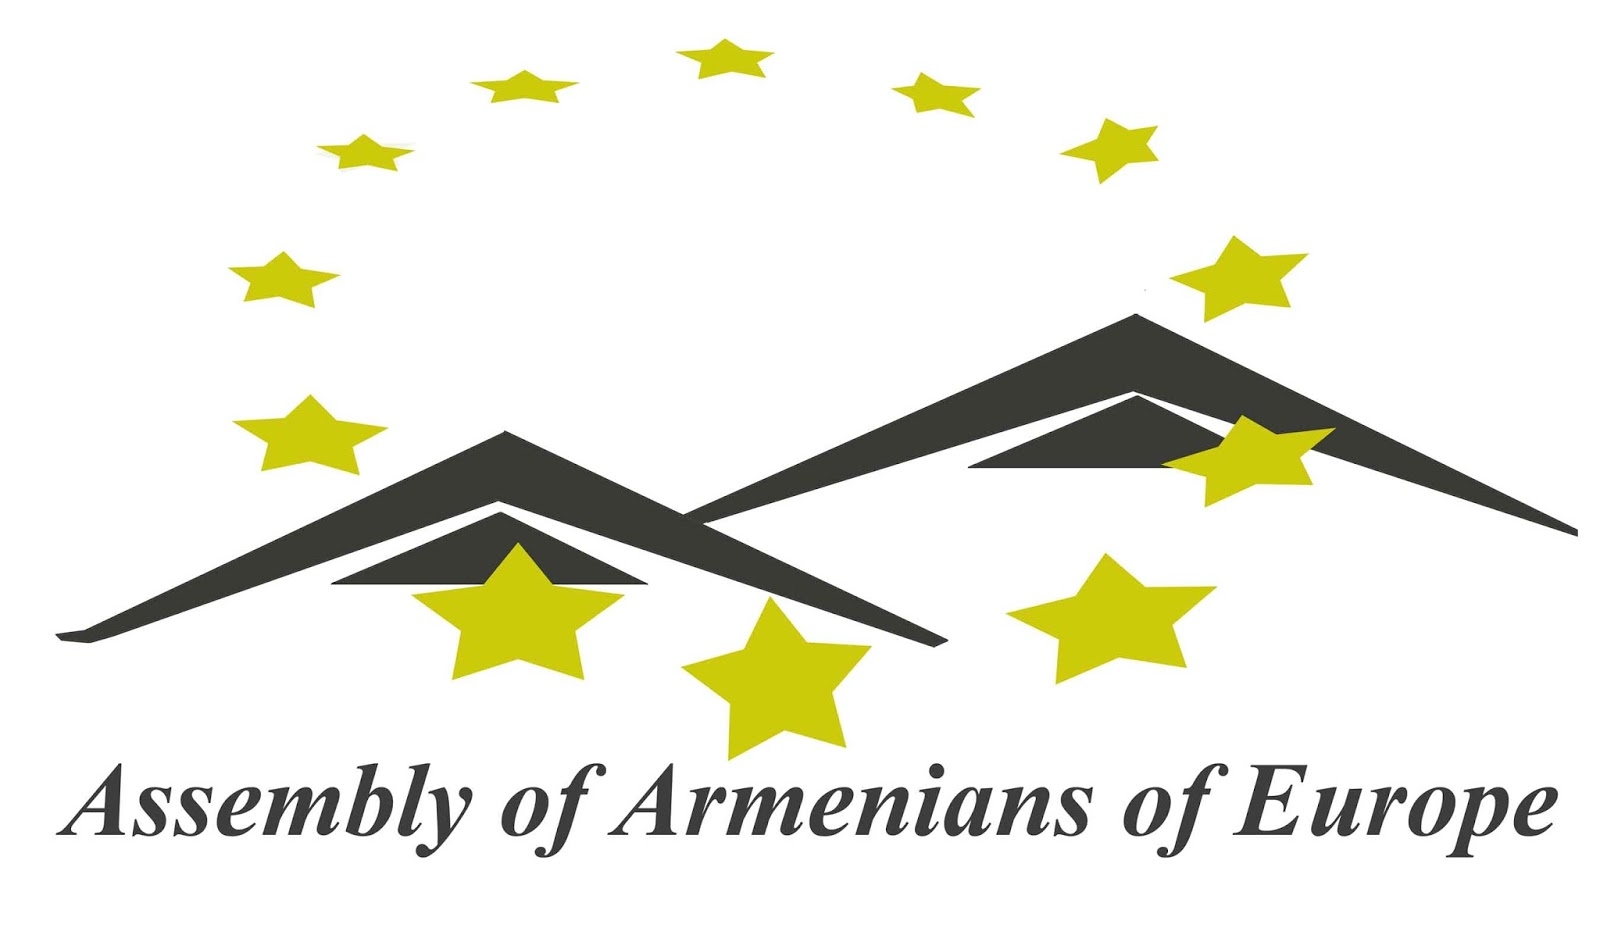 Assembly of Armenians of Europe calls UN to condemn Turkey